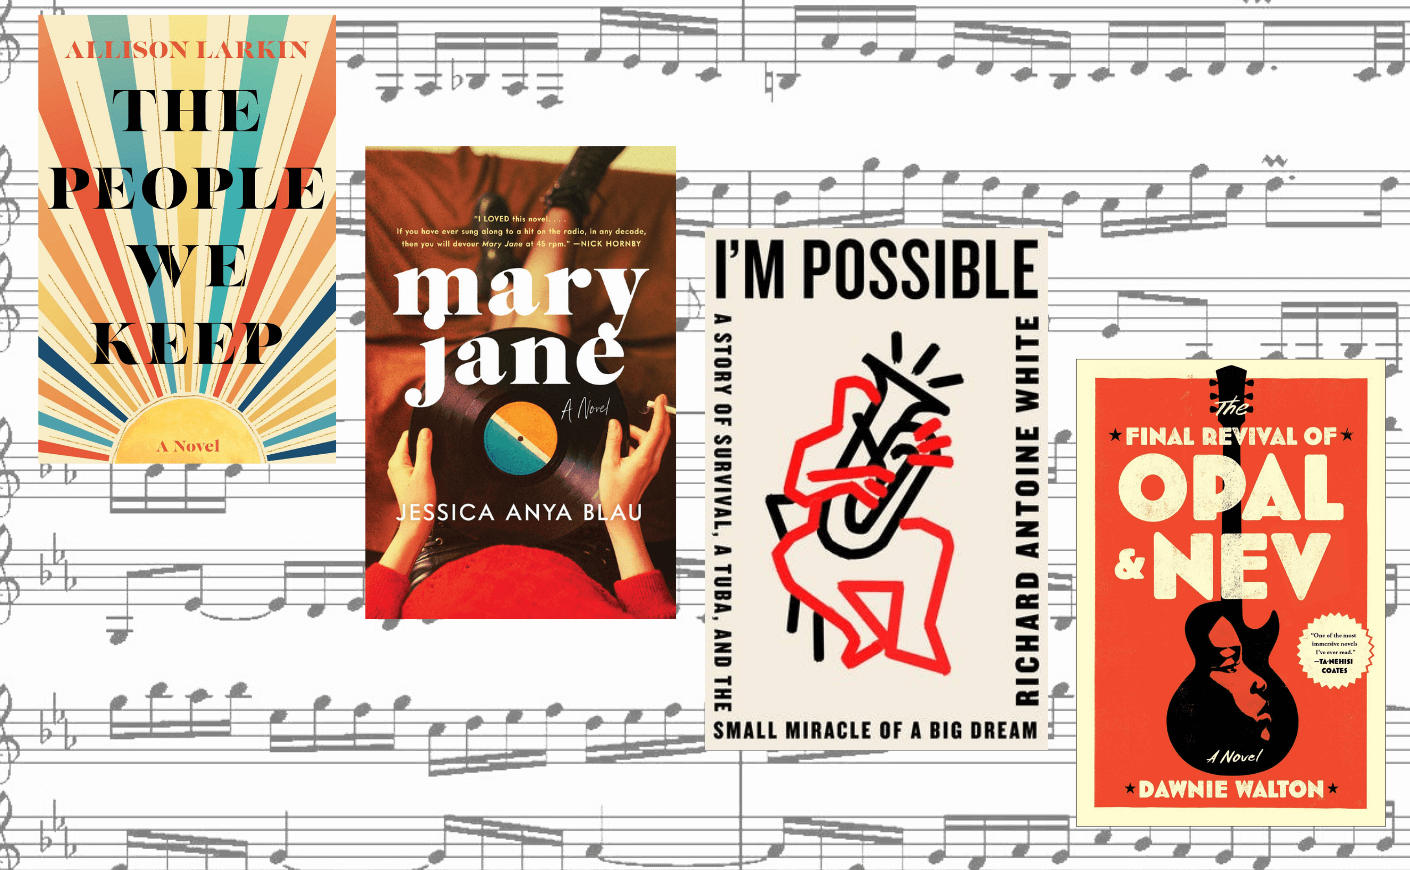 a collage of books over top of musical notes